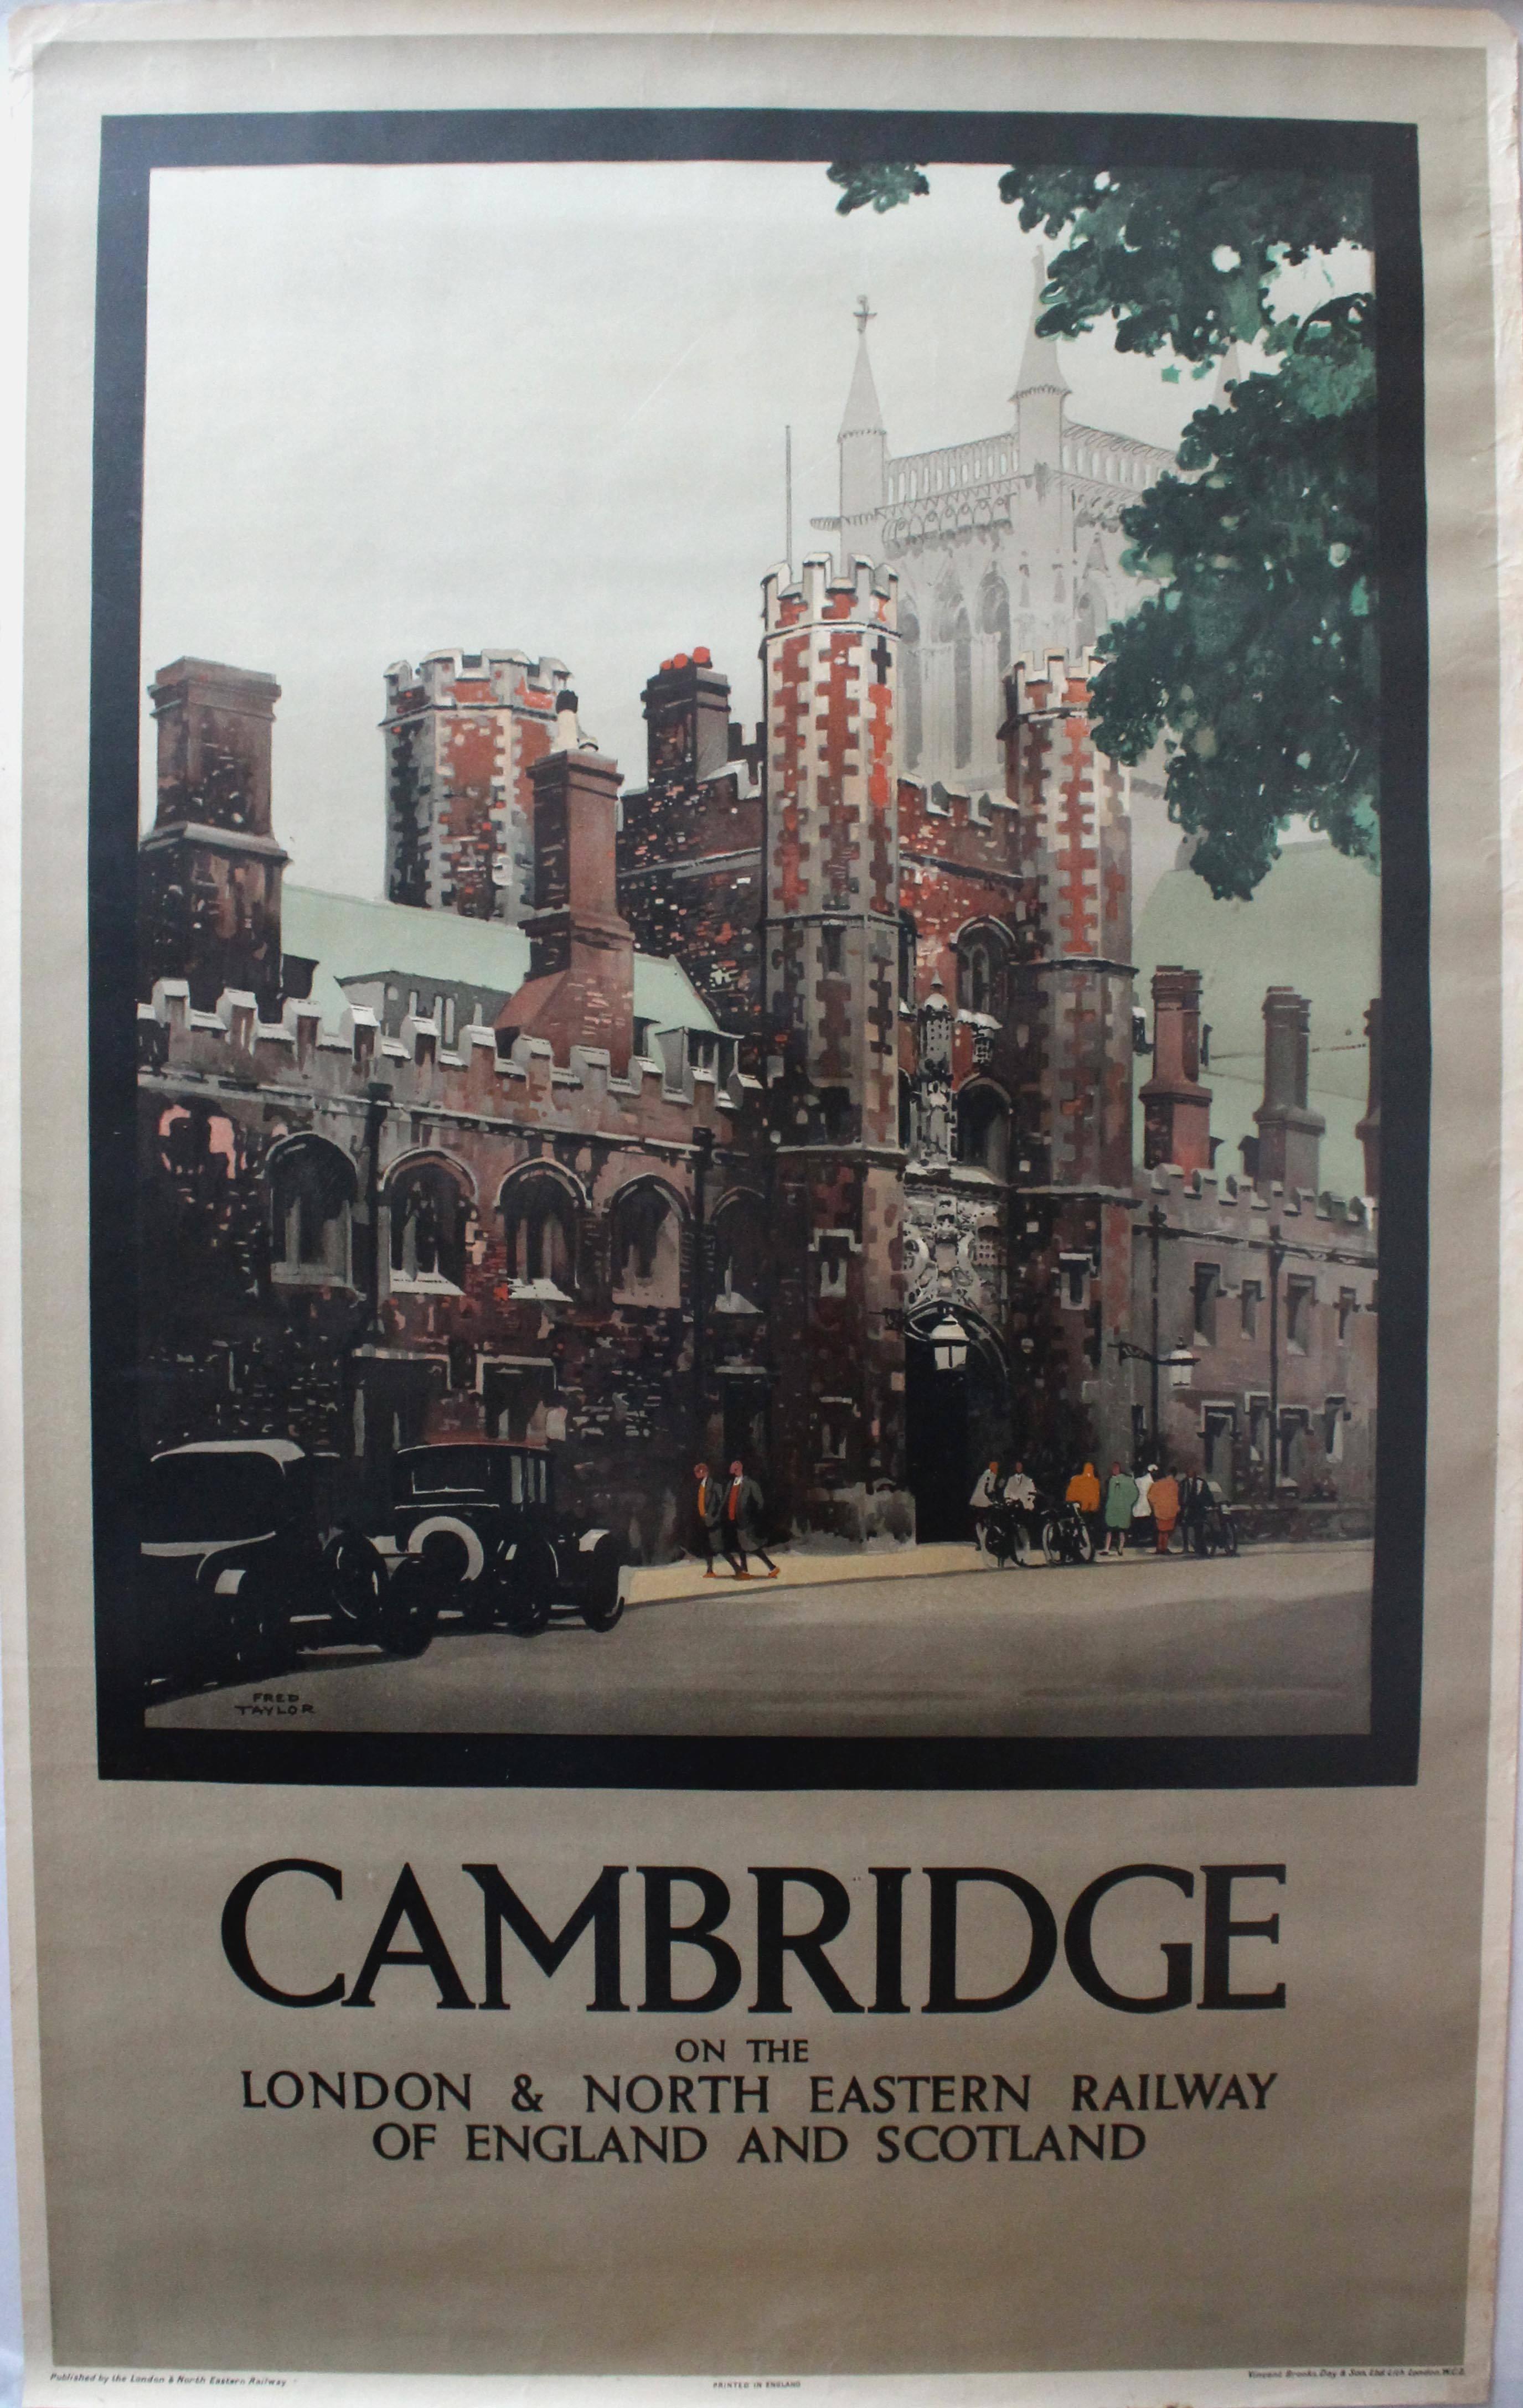 Original vintage travel advertising poster for Cambridge on London & North Eastern Railway of England and Scotland (LNER - the London and North Eastern Railway, 1923-1948). Great image of a Cambridge scene with classic cars and people walking and